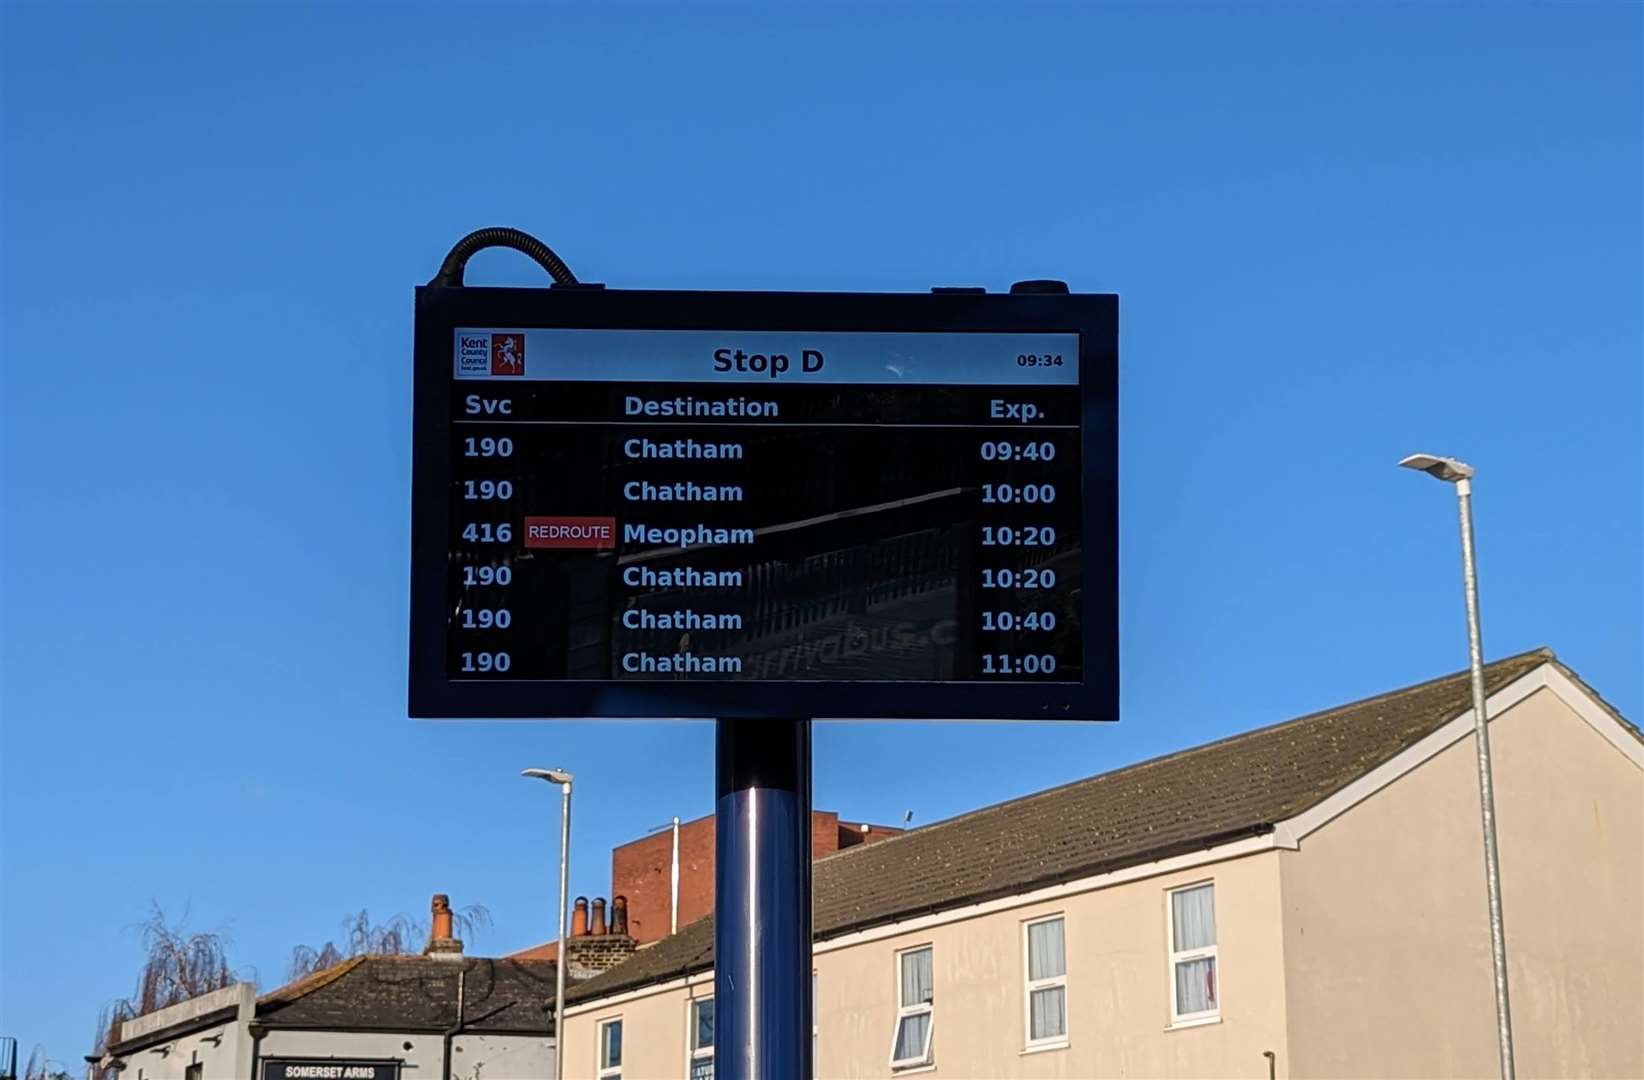 The timetable shows the next buses onwards from Gravesend to Chatham